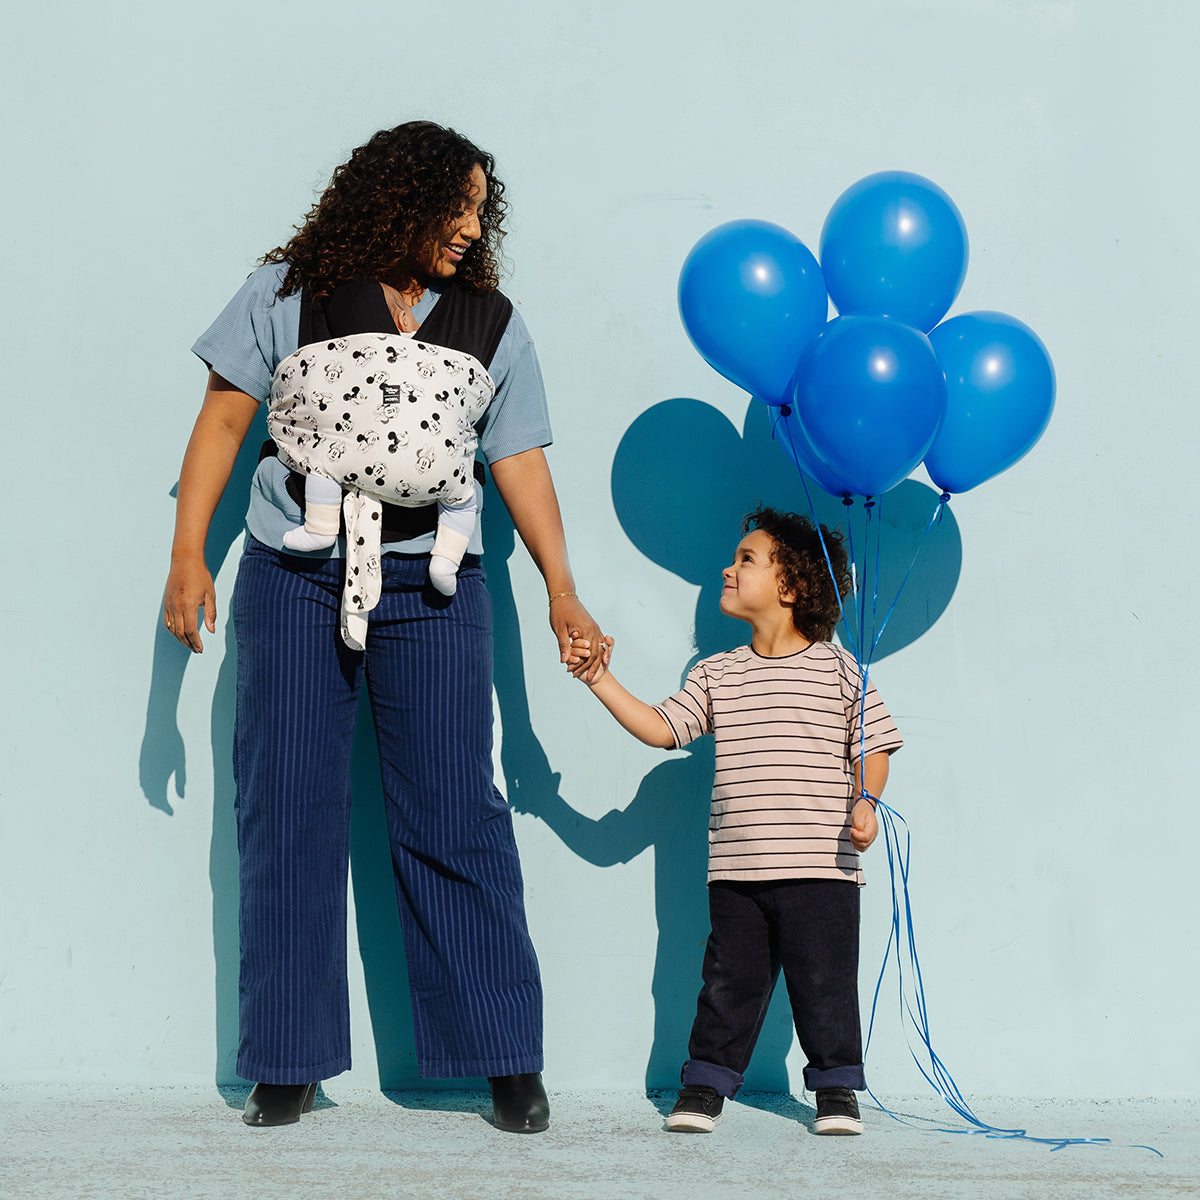 mom wearing baby in Easy-Wrap Carrier in Disney's Mickey Mouse & Minnie Mouse while holding hands with toddler boy who is holding blue balloons in his other hand